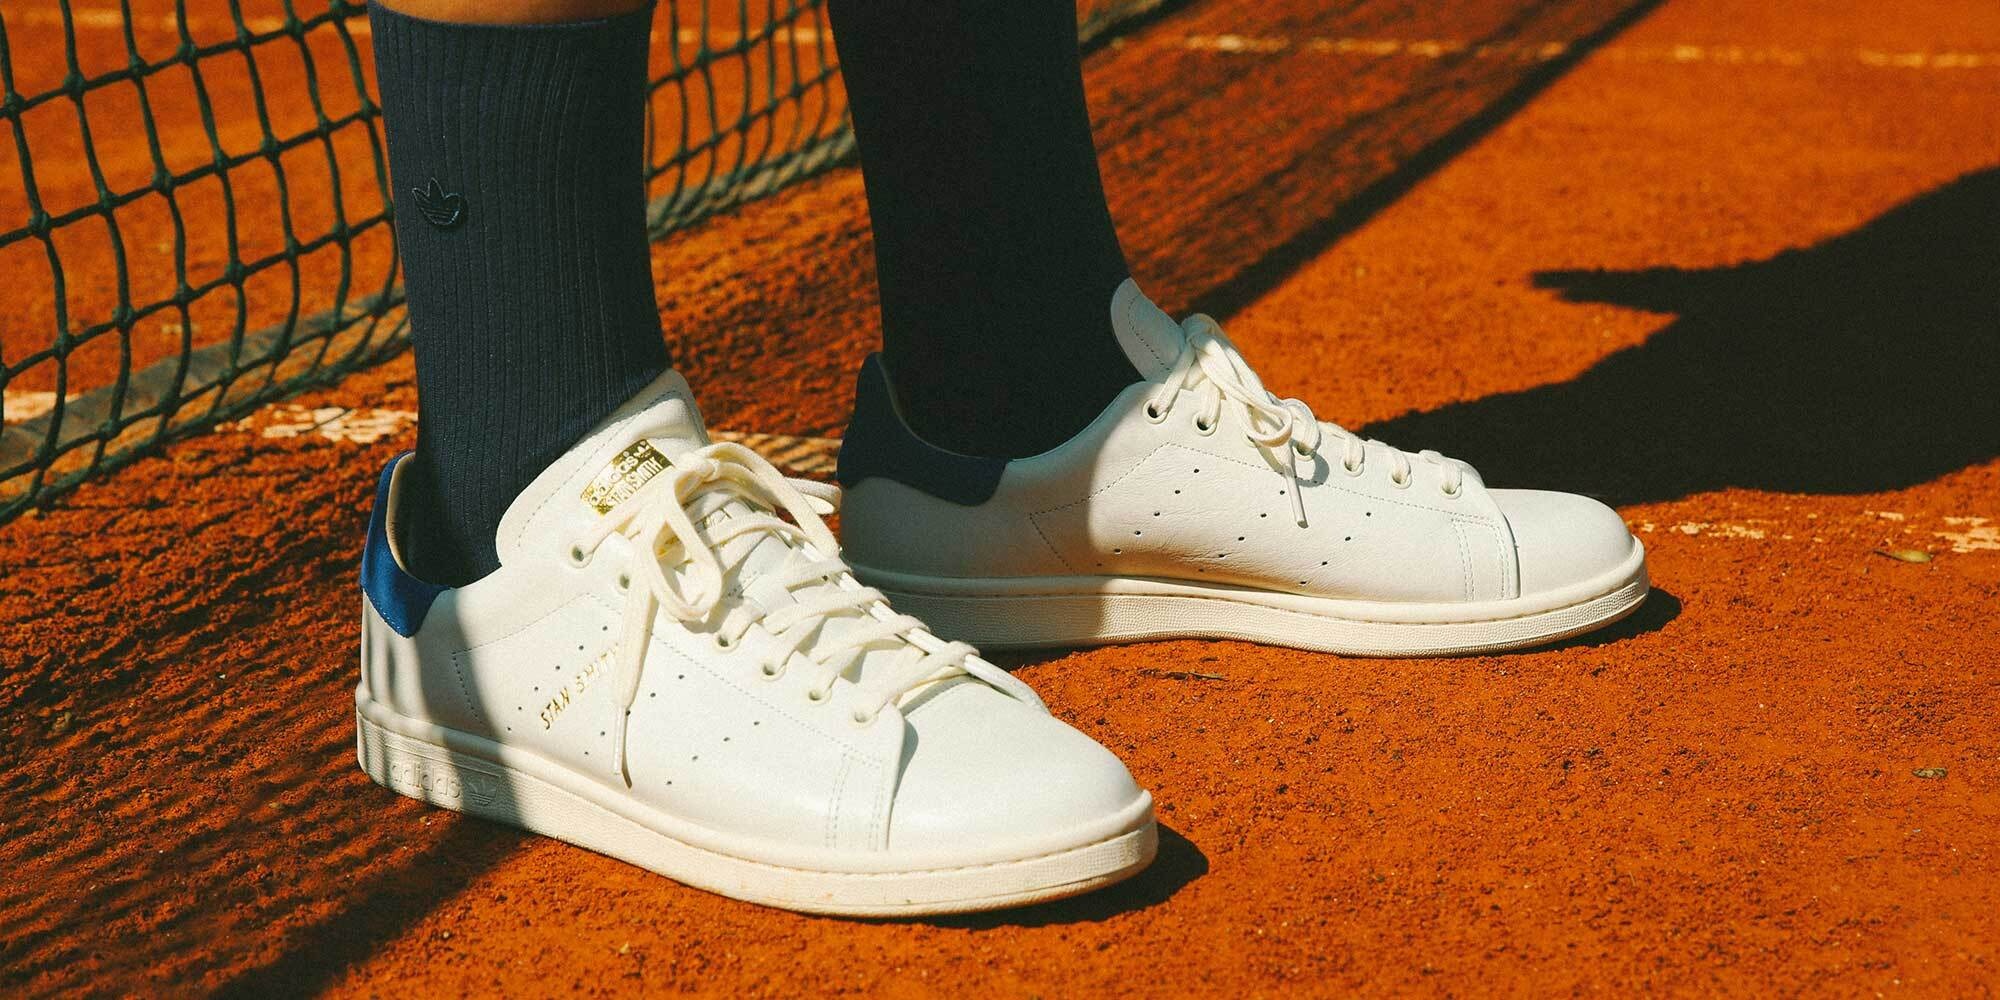 Blog - Redefined luxury with the adidas Stan Smith Lux - Baskèts